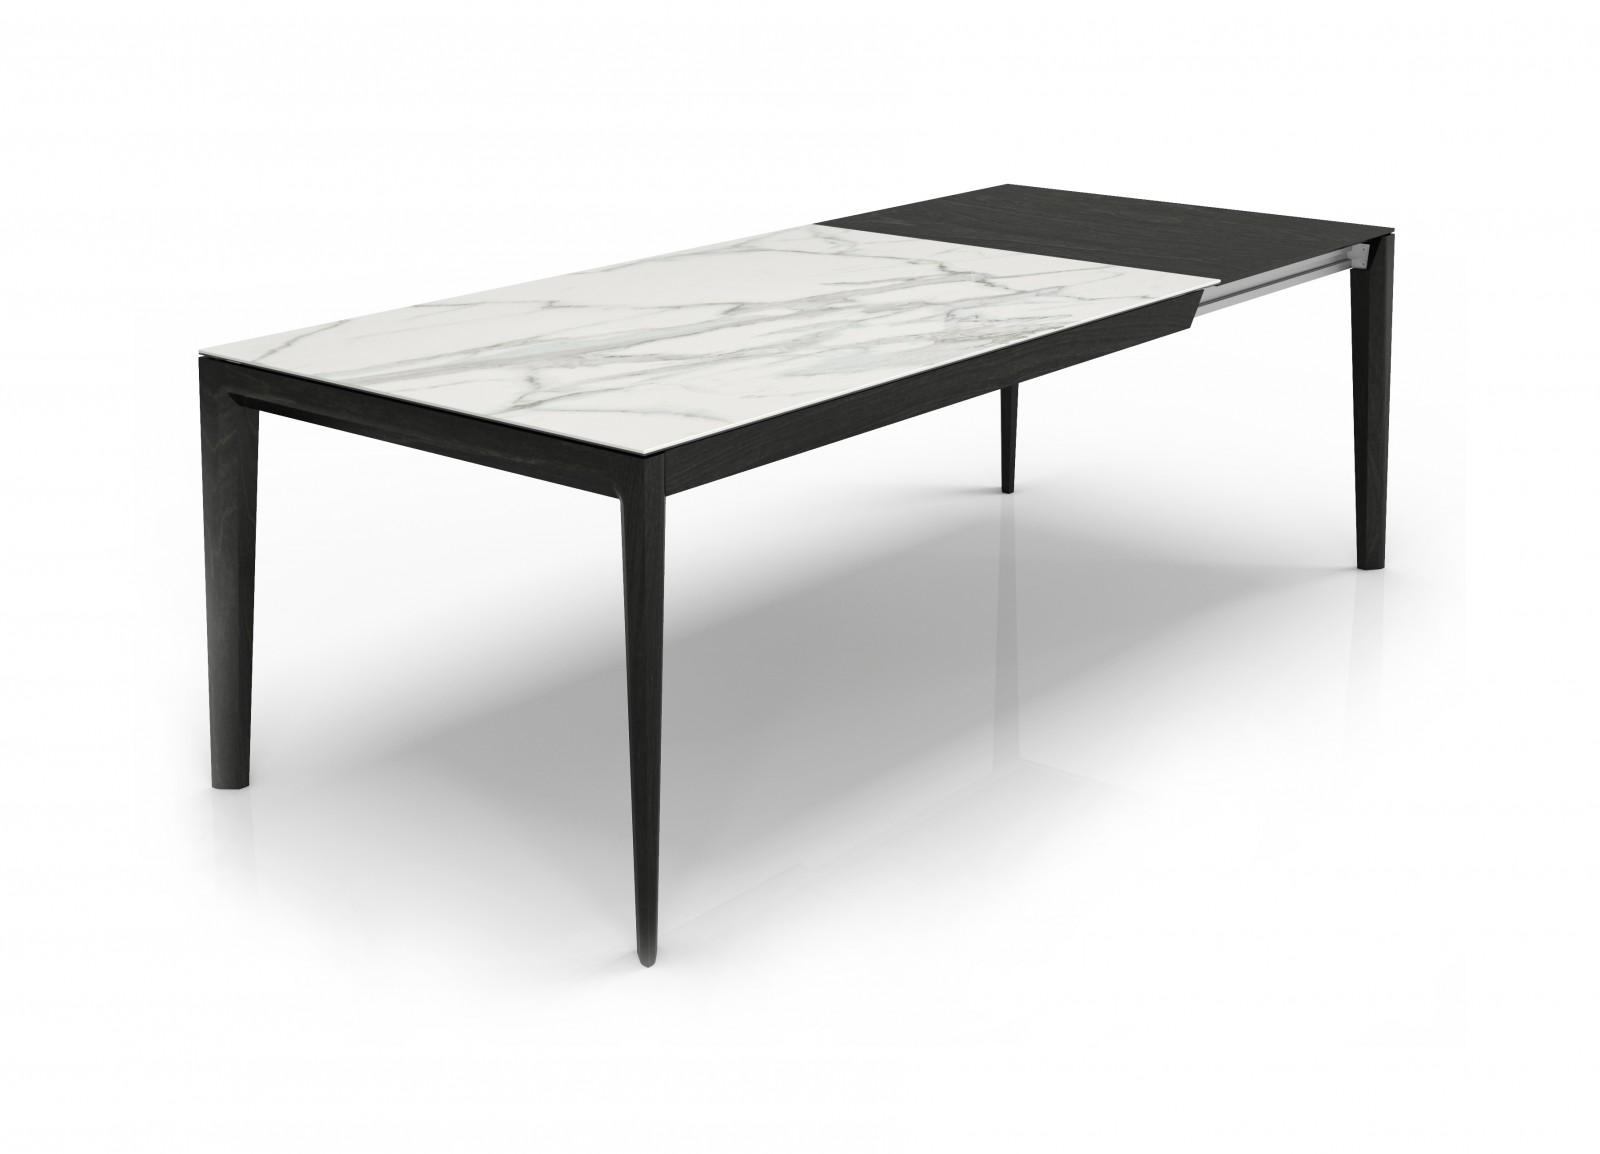 64" Ceramic top extension table